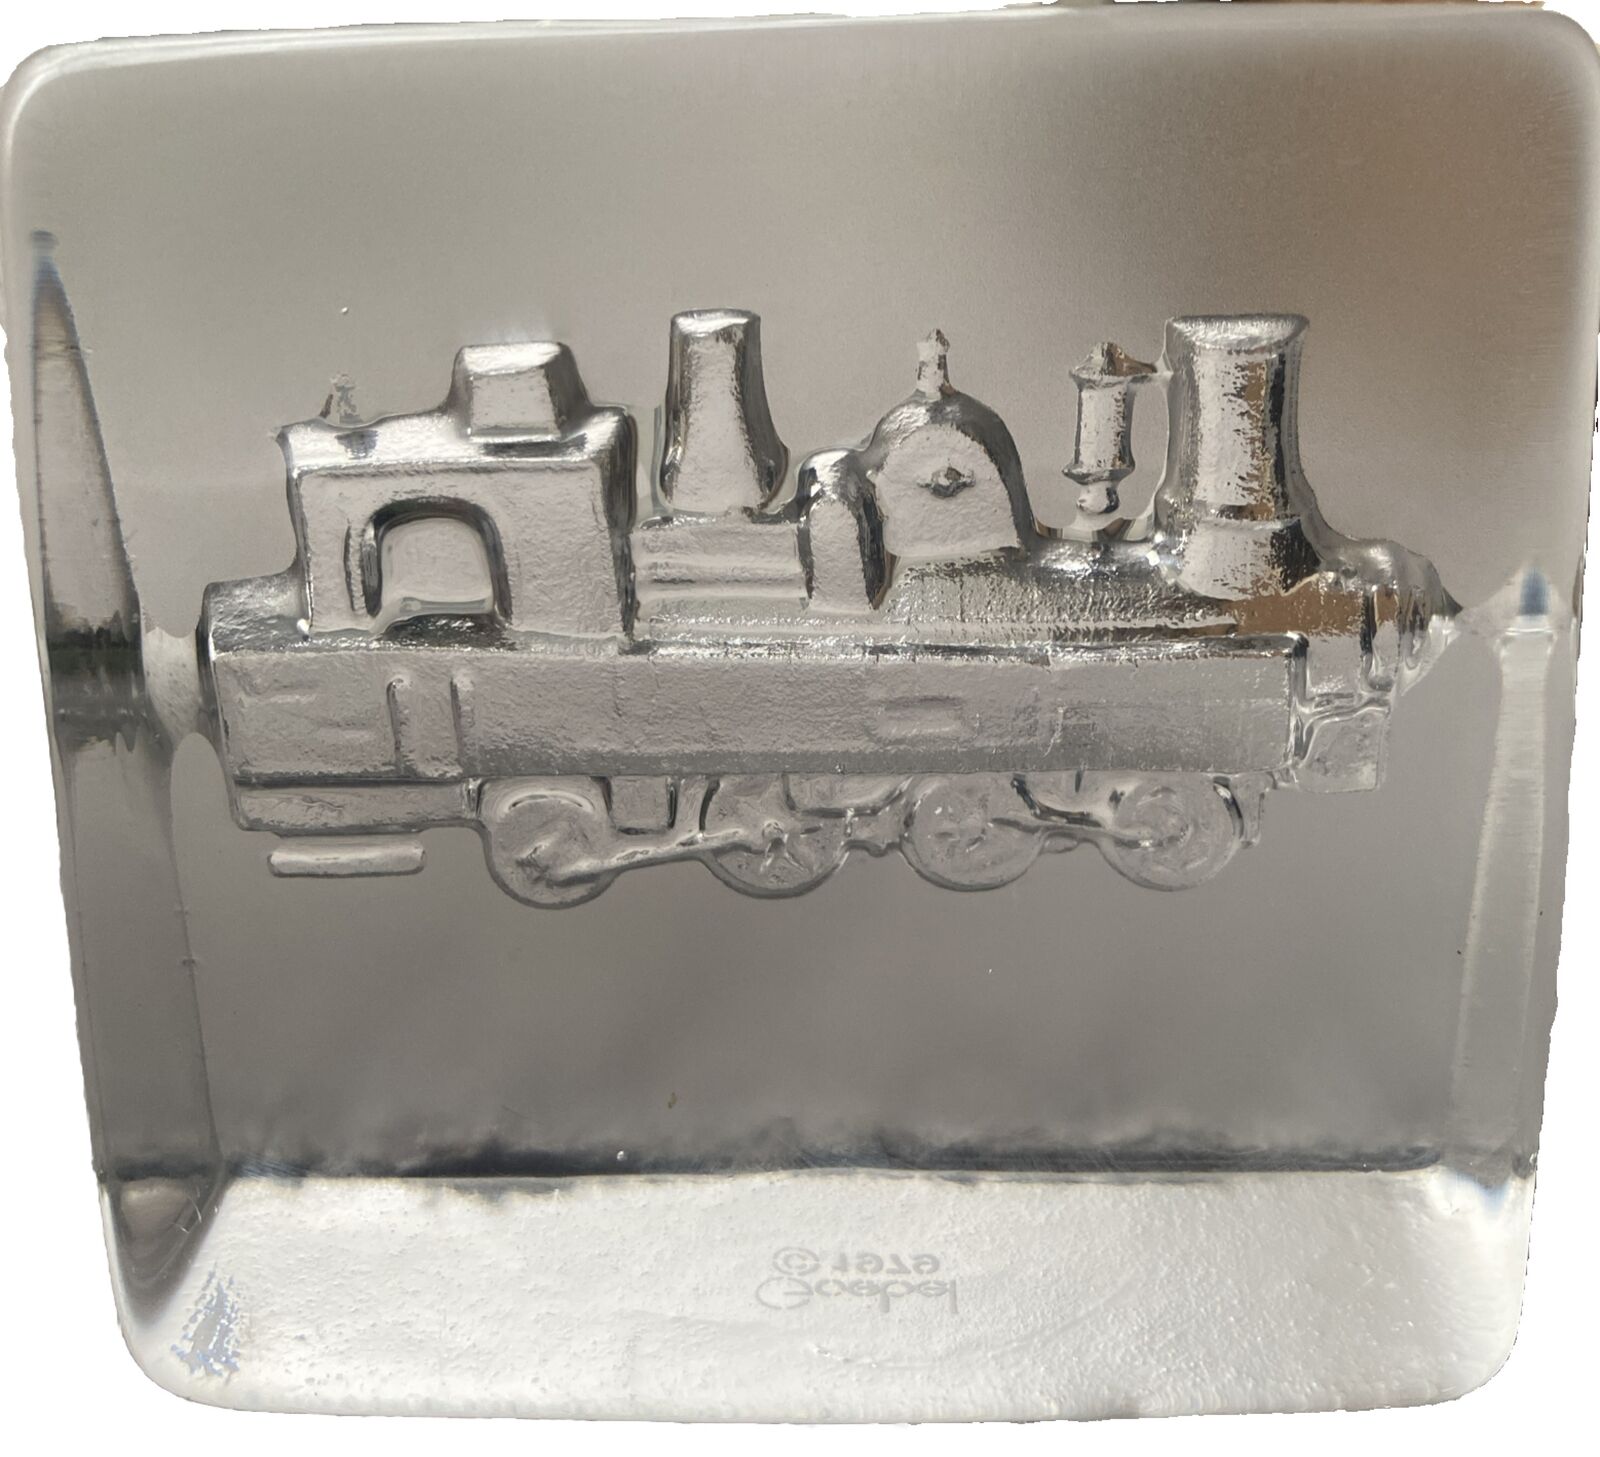 Goebel Train Locomotive Paperweight Clear Glass Block Carved Or Stamped In Back